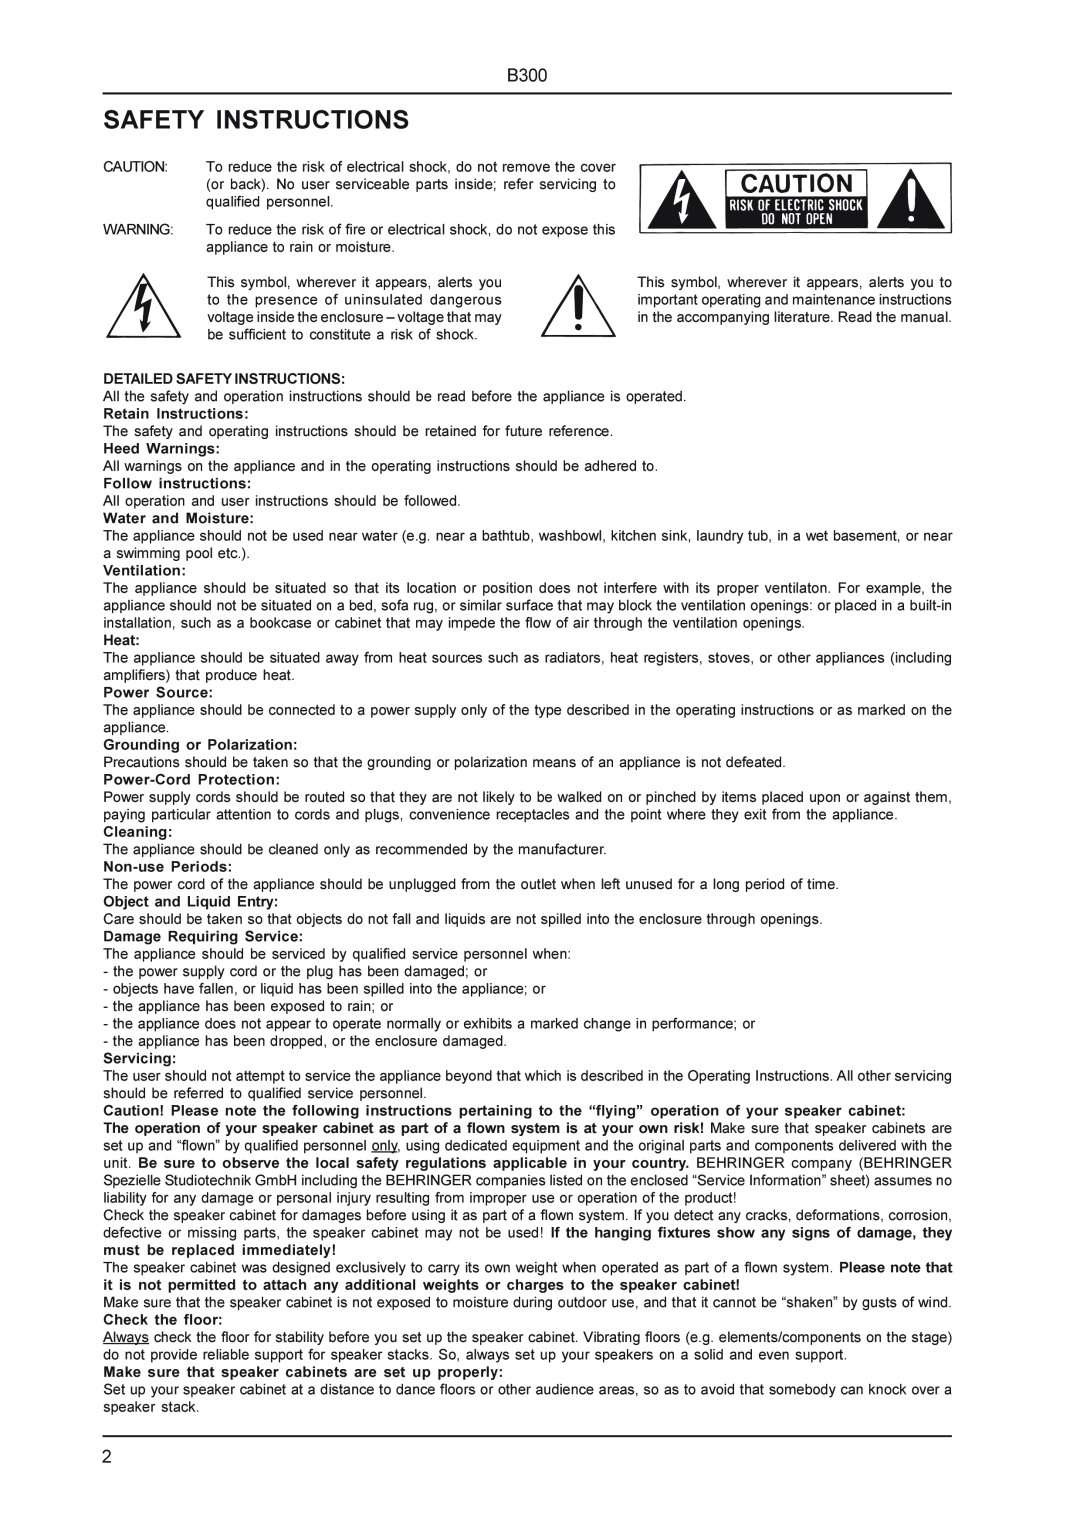 Behringer B300 manual Safety Instructions 